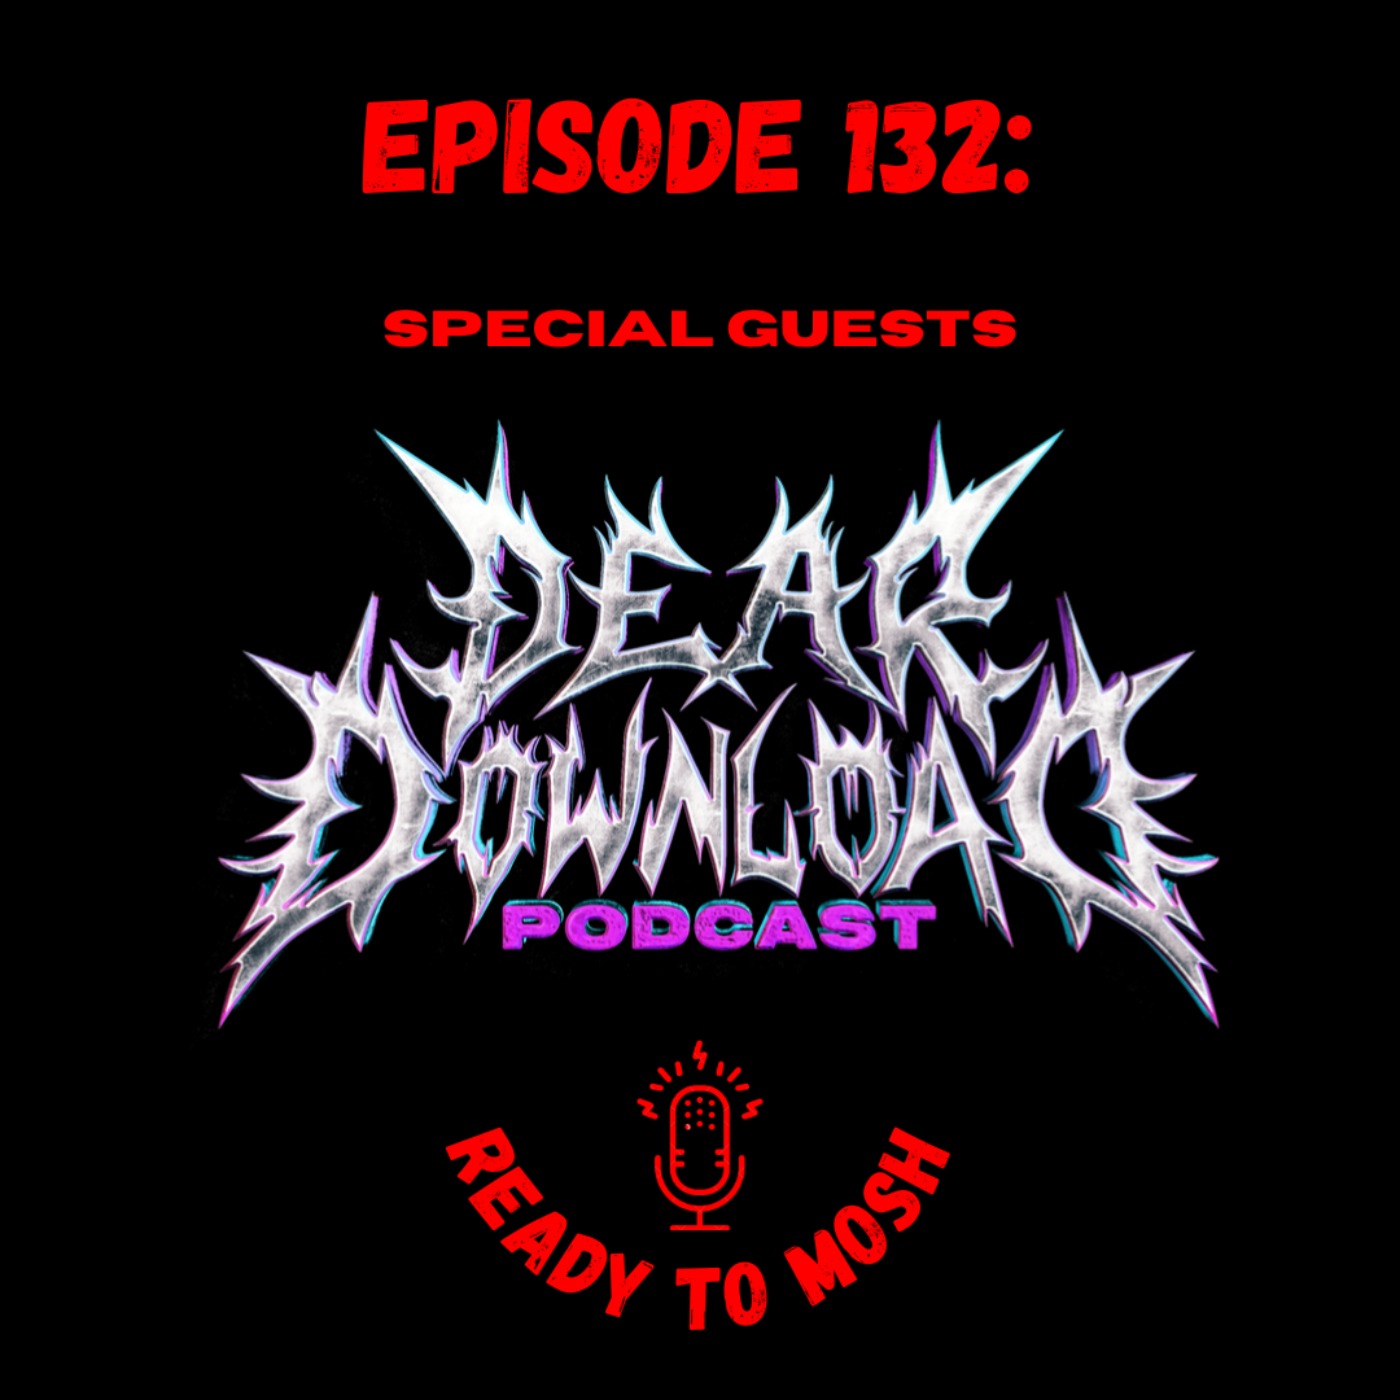 EP 132: Special Guests Dear Download Podcast